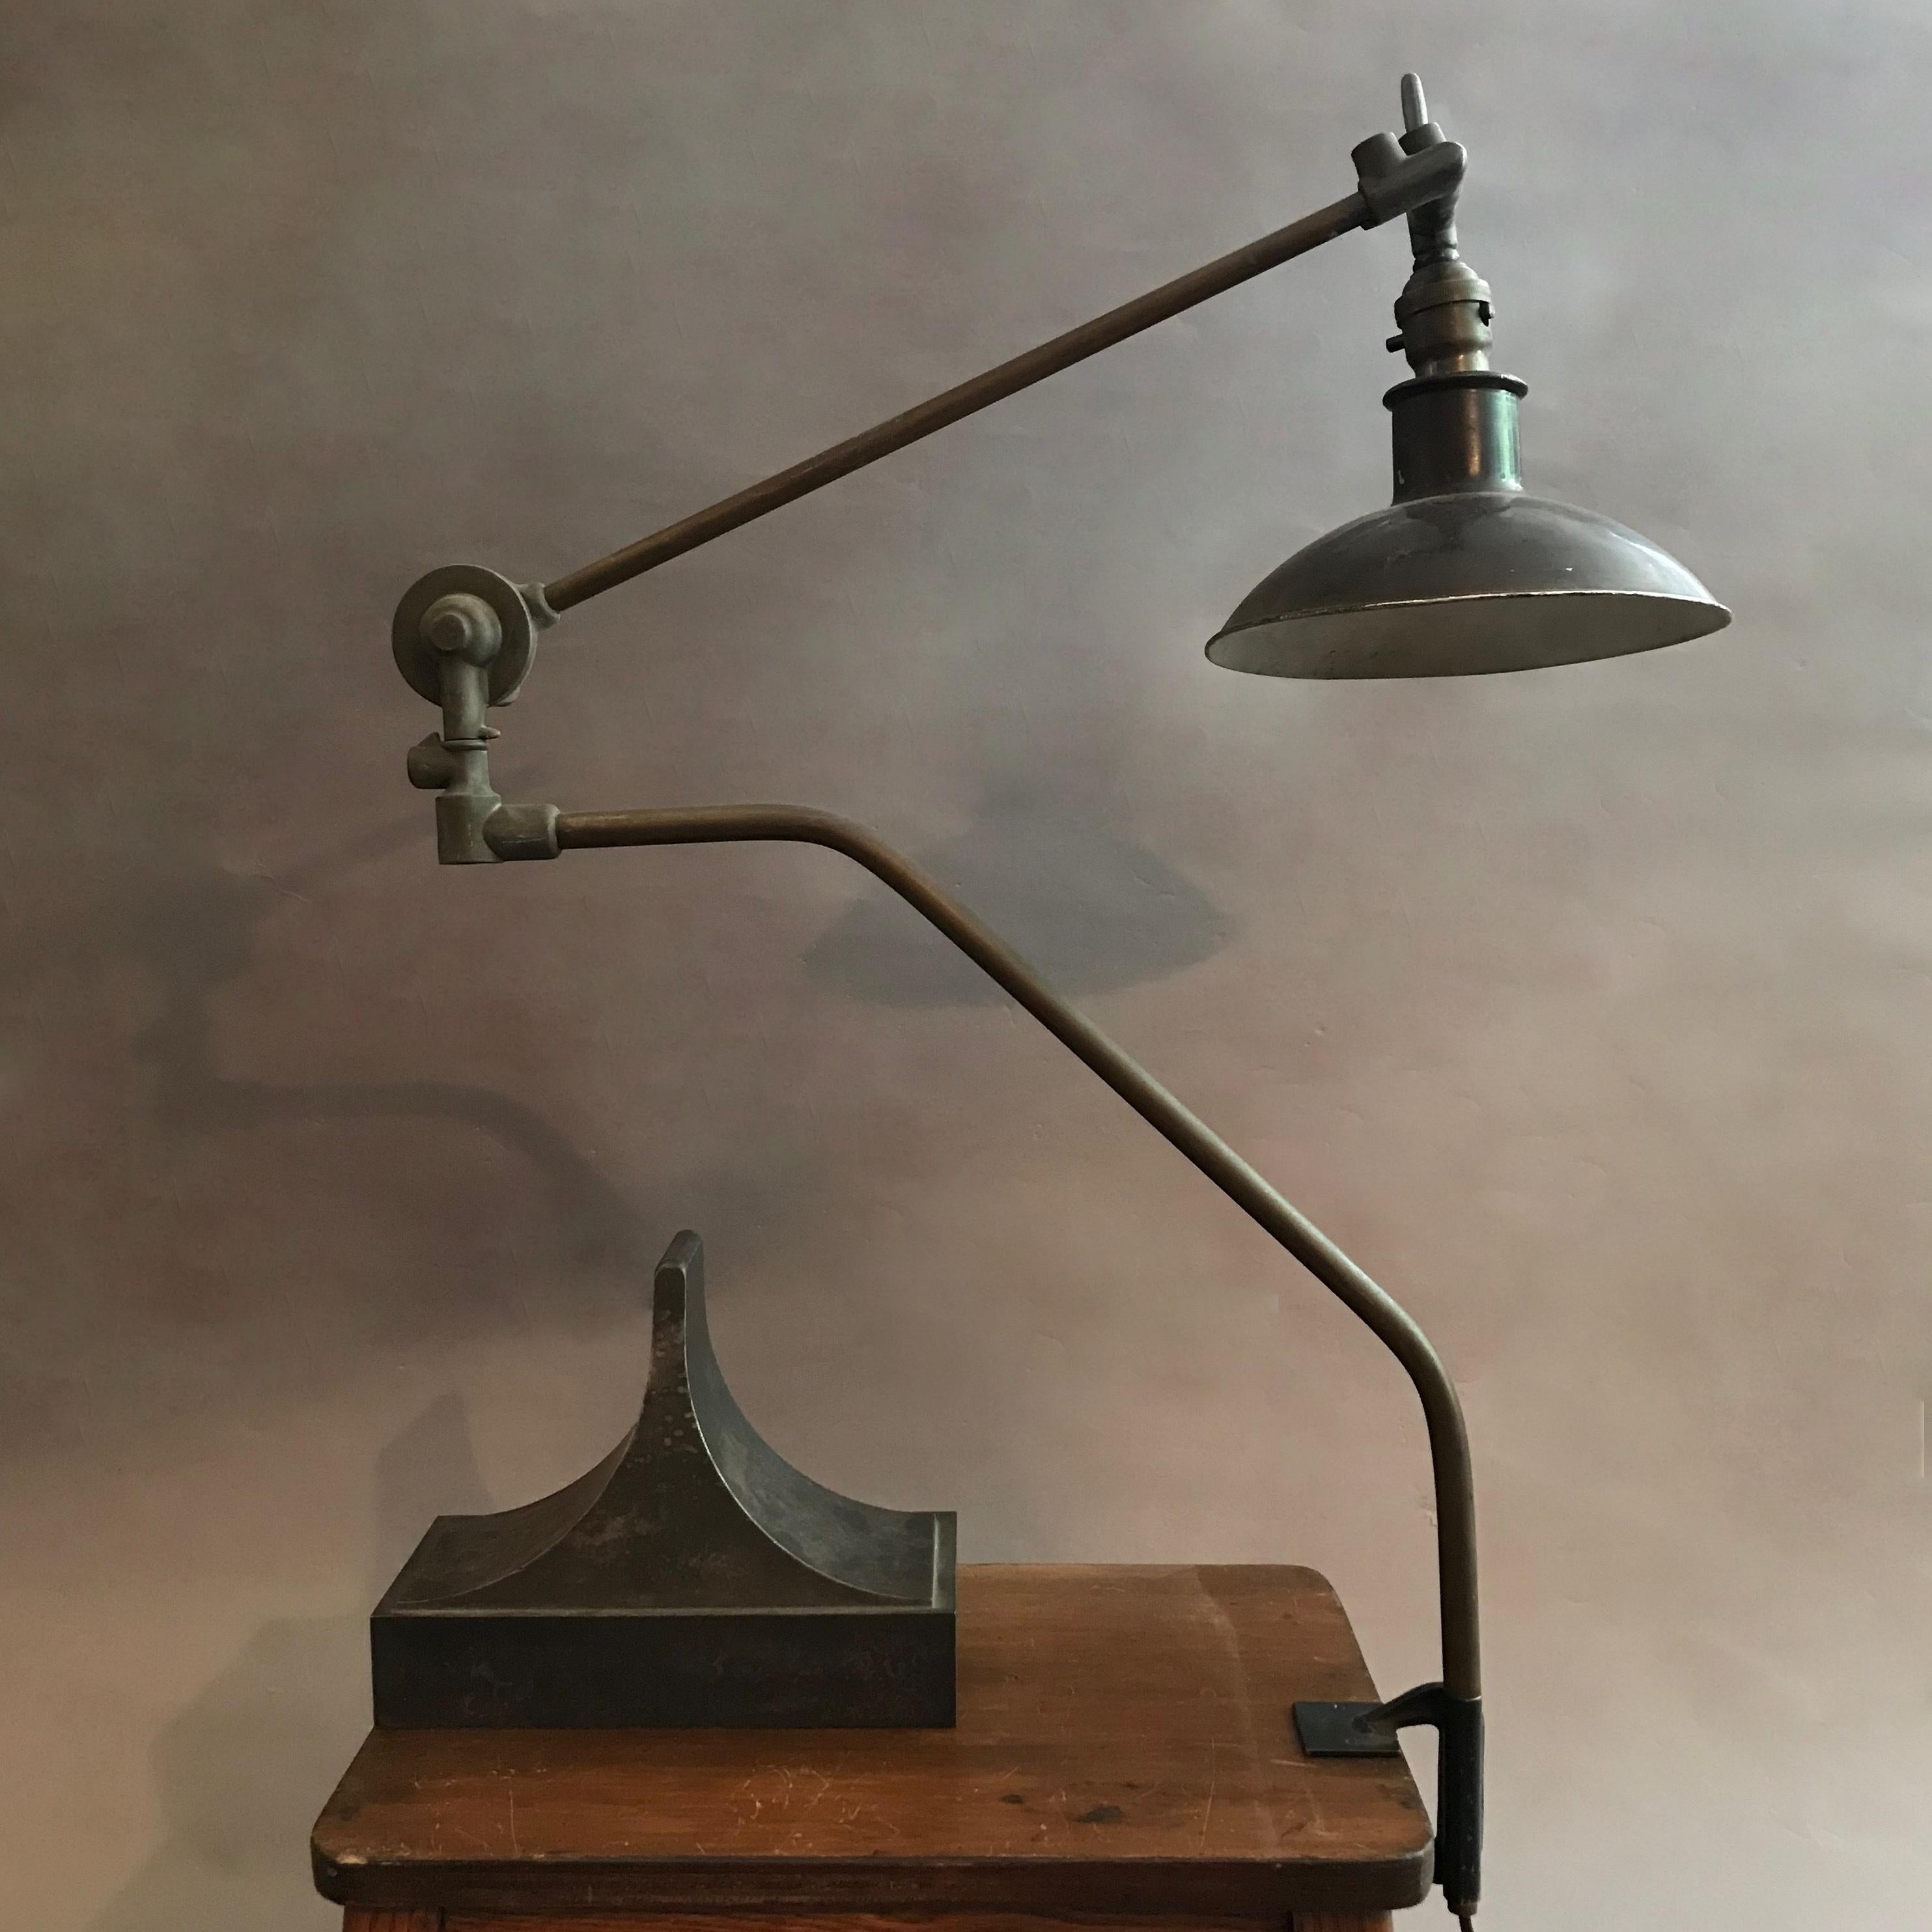 Outstanding, early 20th century, brass and metal task, work lamp signed Malleable pivots 360 degrees at it's base and top hinge where the height can be adjusted as well. The lamp shows incredible patina and elegant lines.